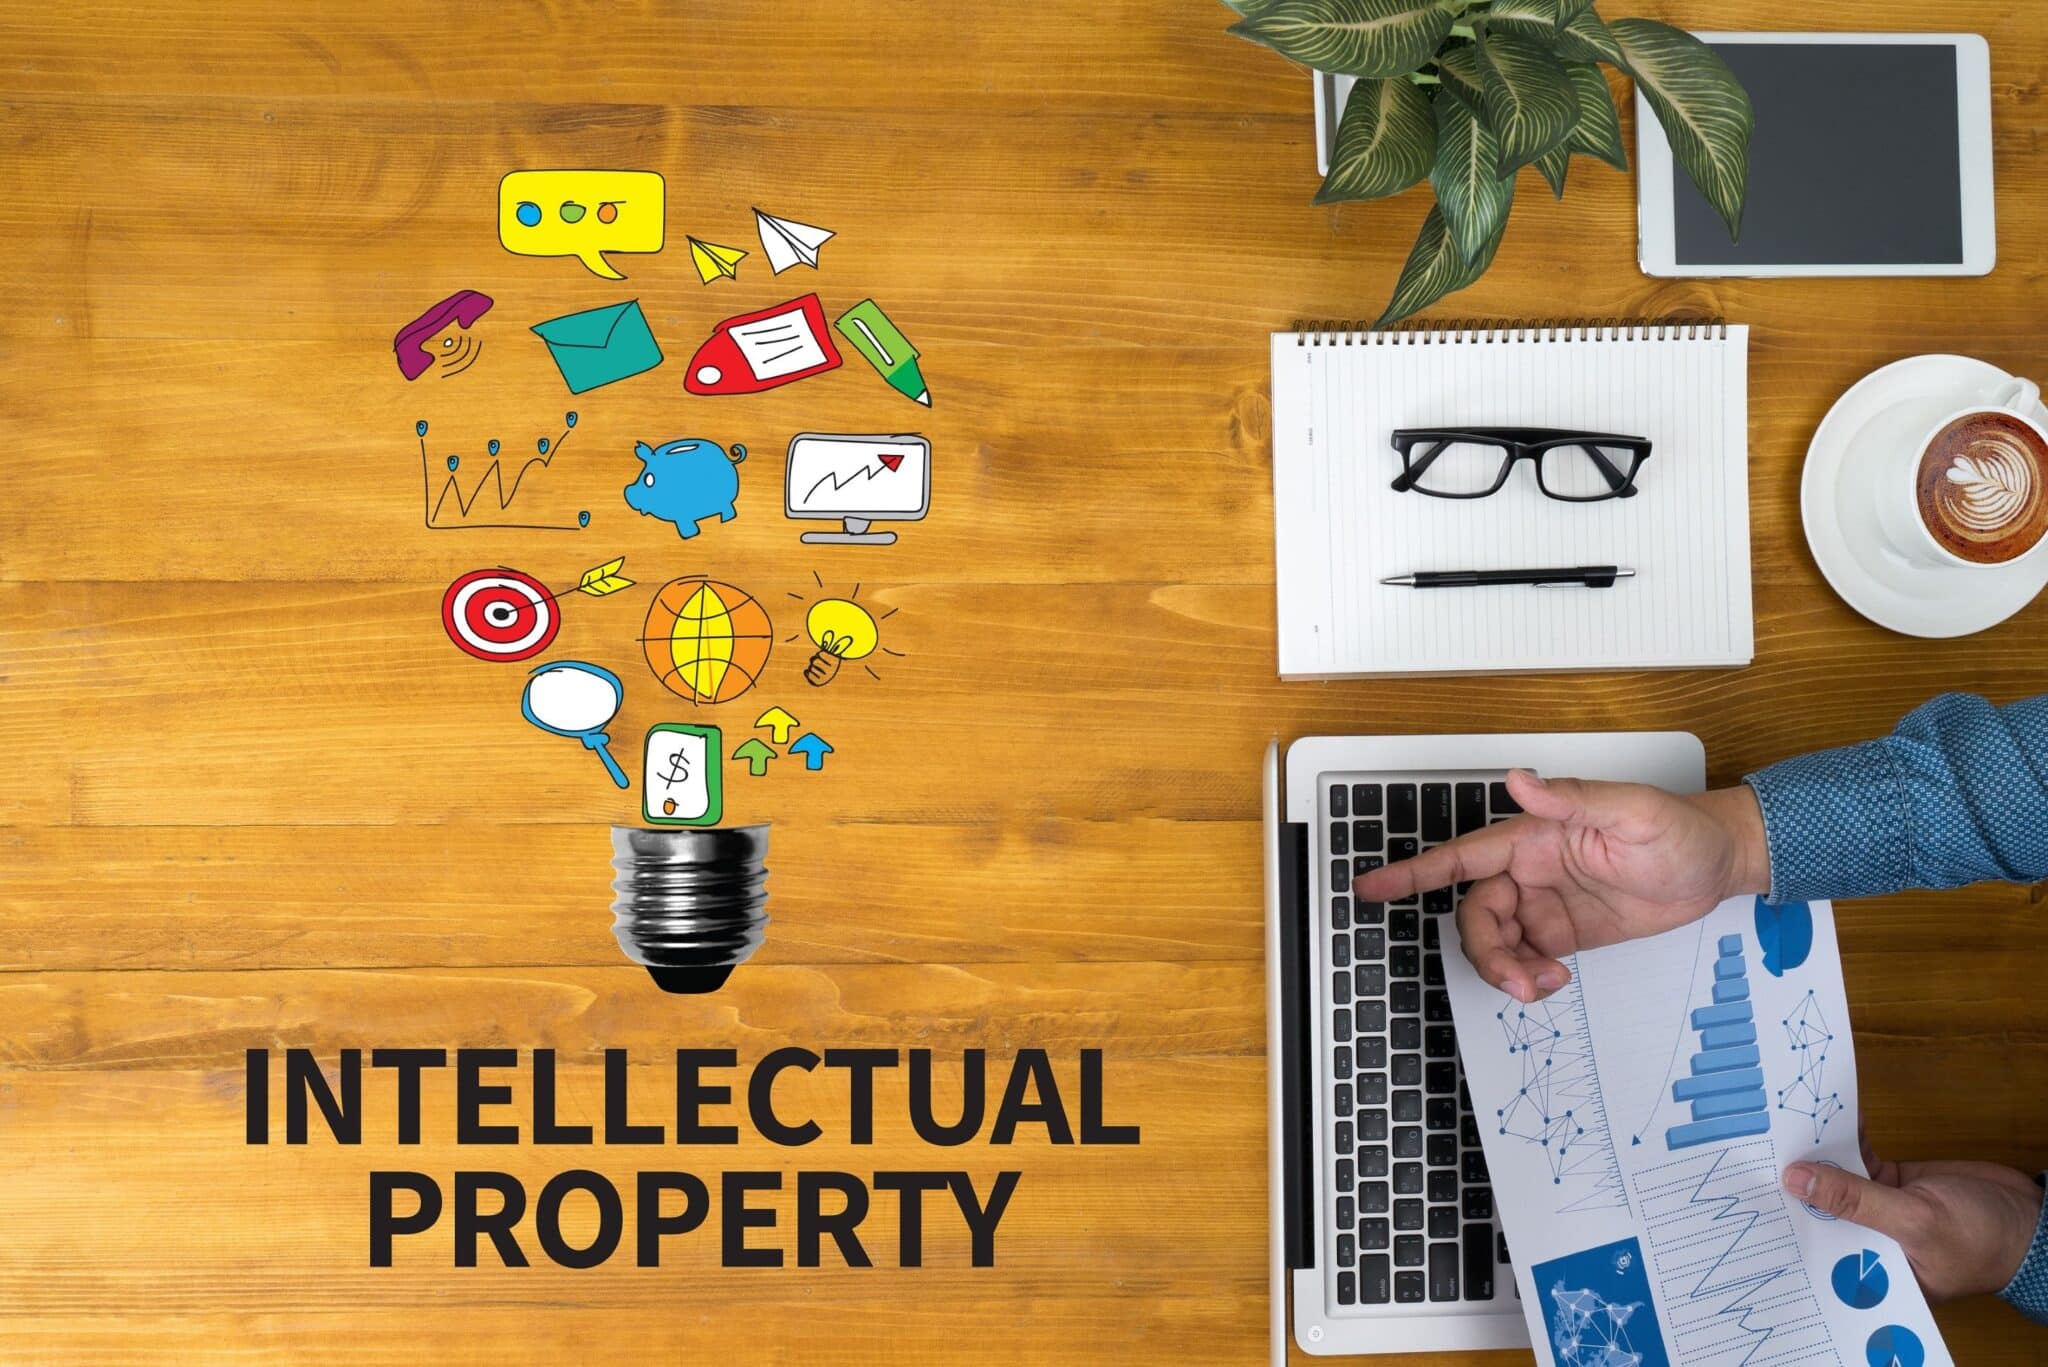 What are the Risks of Intellectual Property Rights Infringement such as Patents, Trademarks, Copyrights, and their Countermeasures?